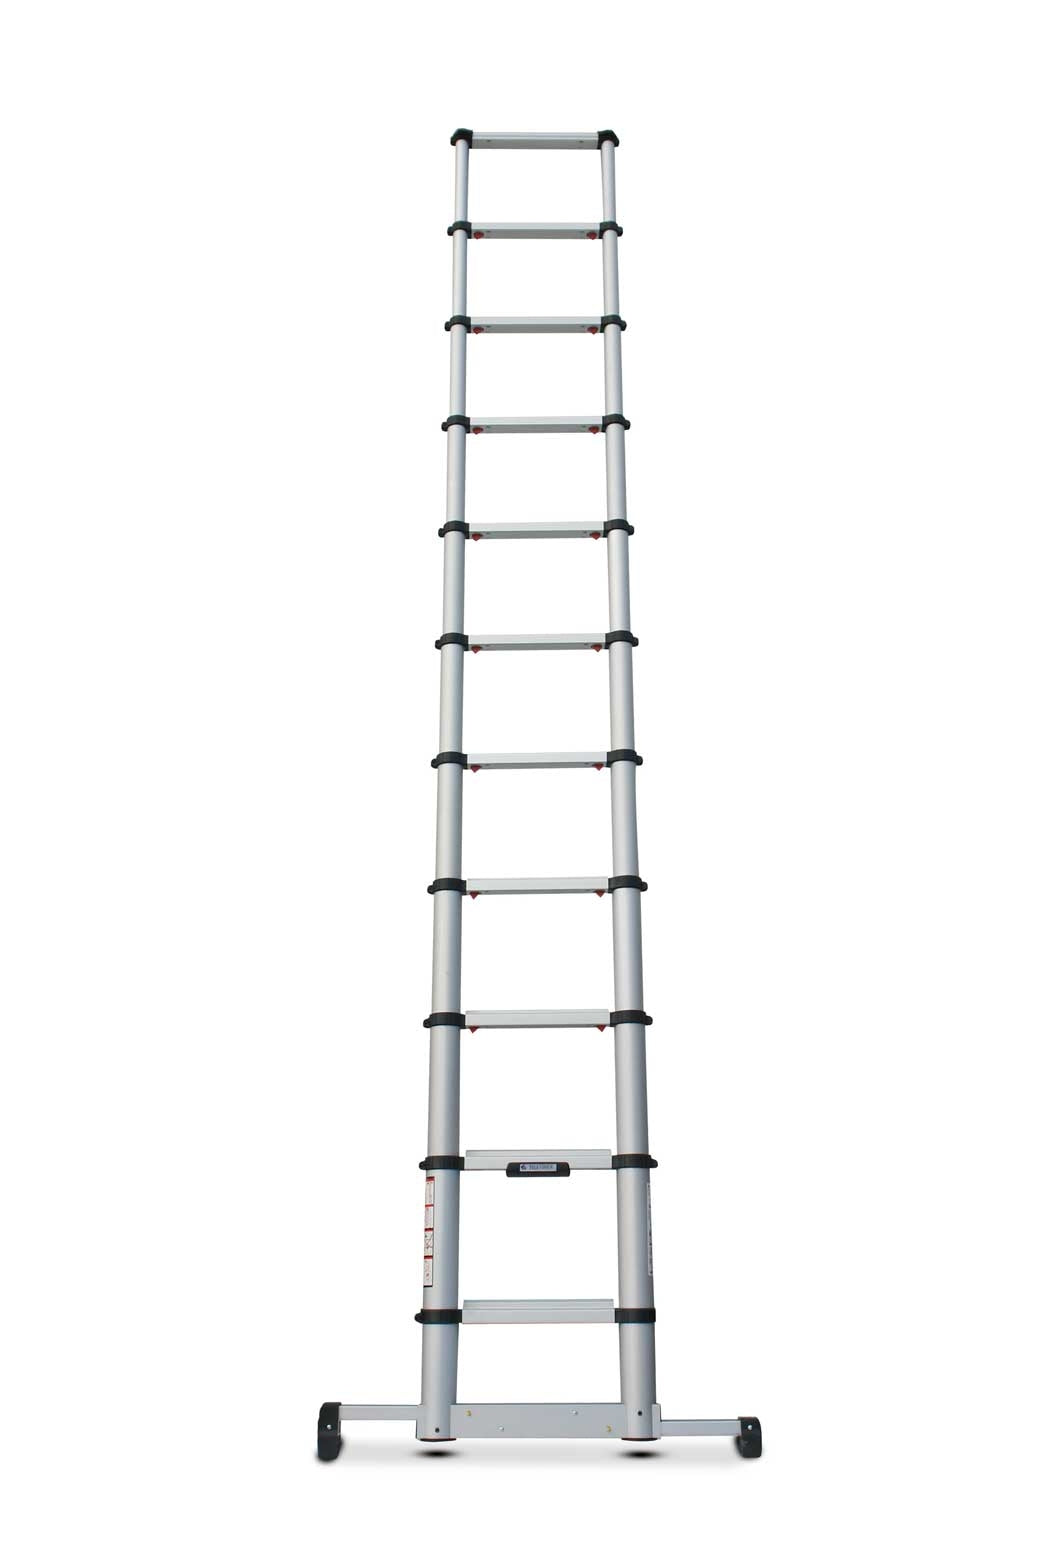 Lyte-up-telscopic-ladder-extended